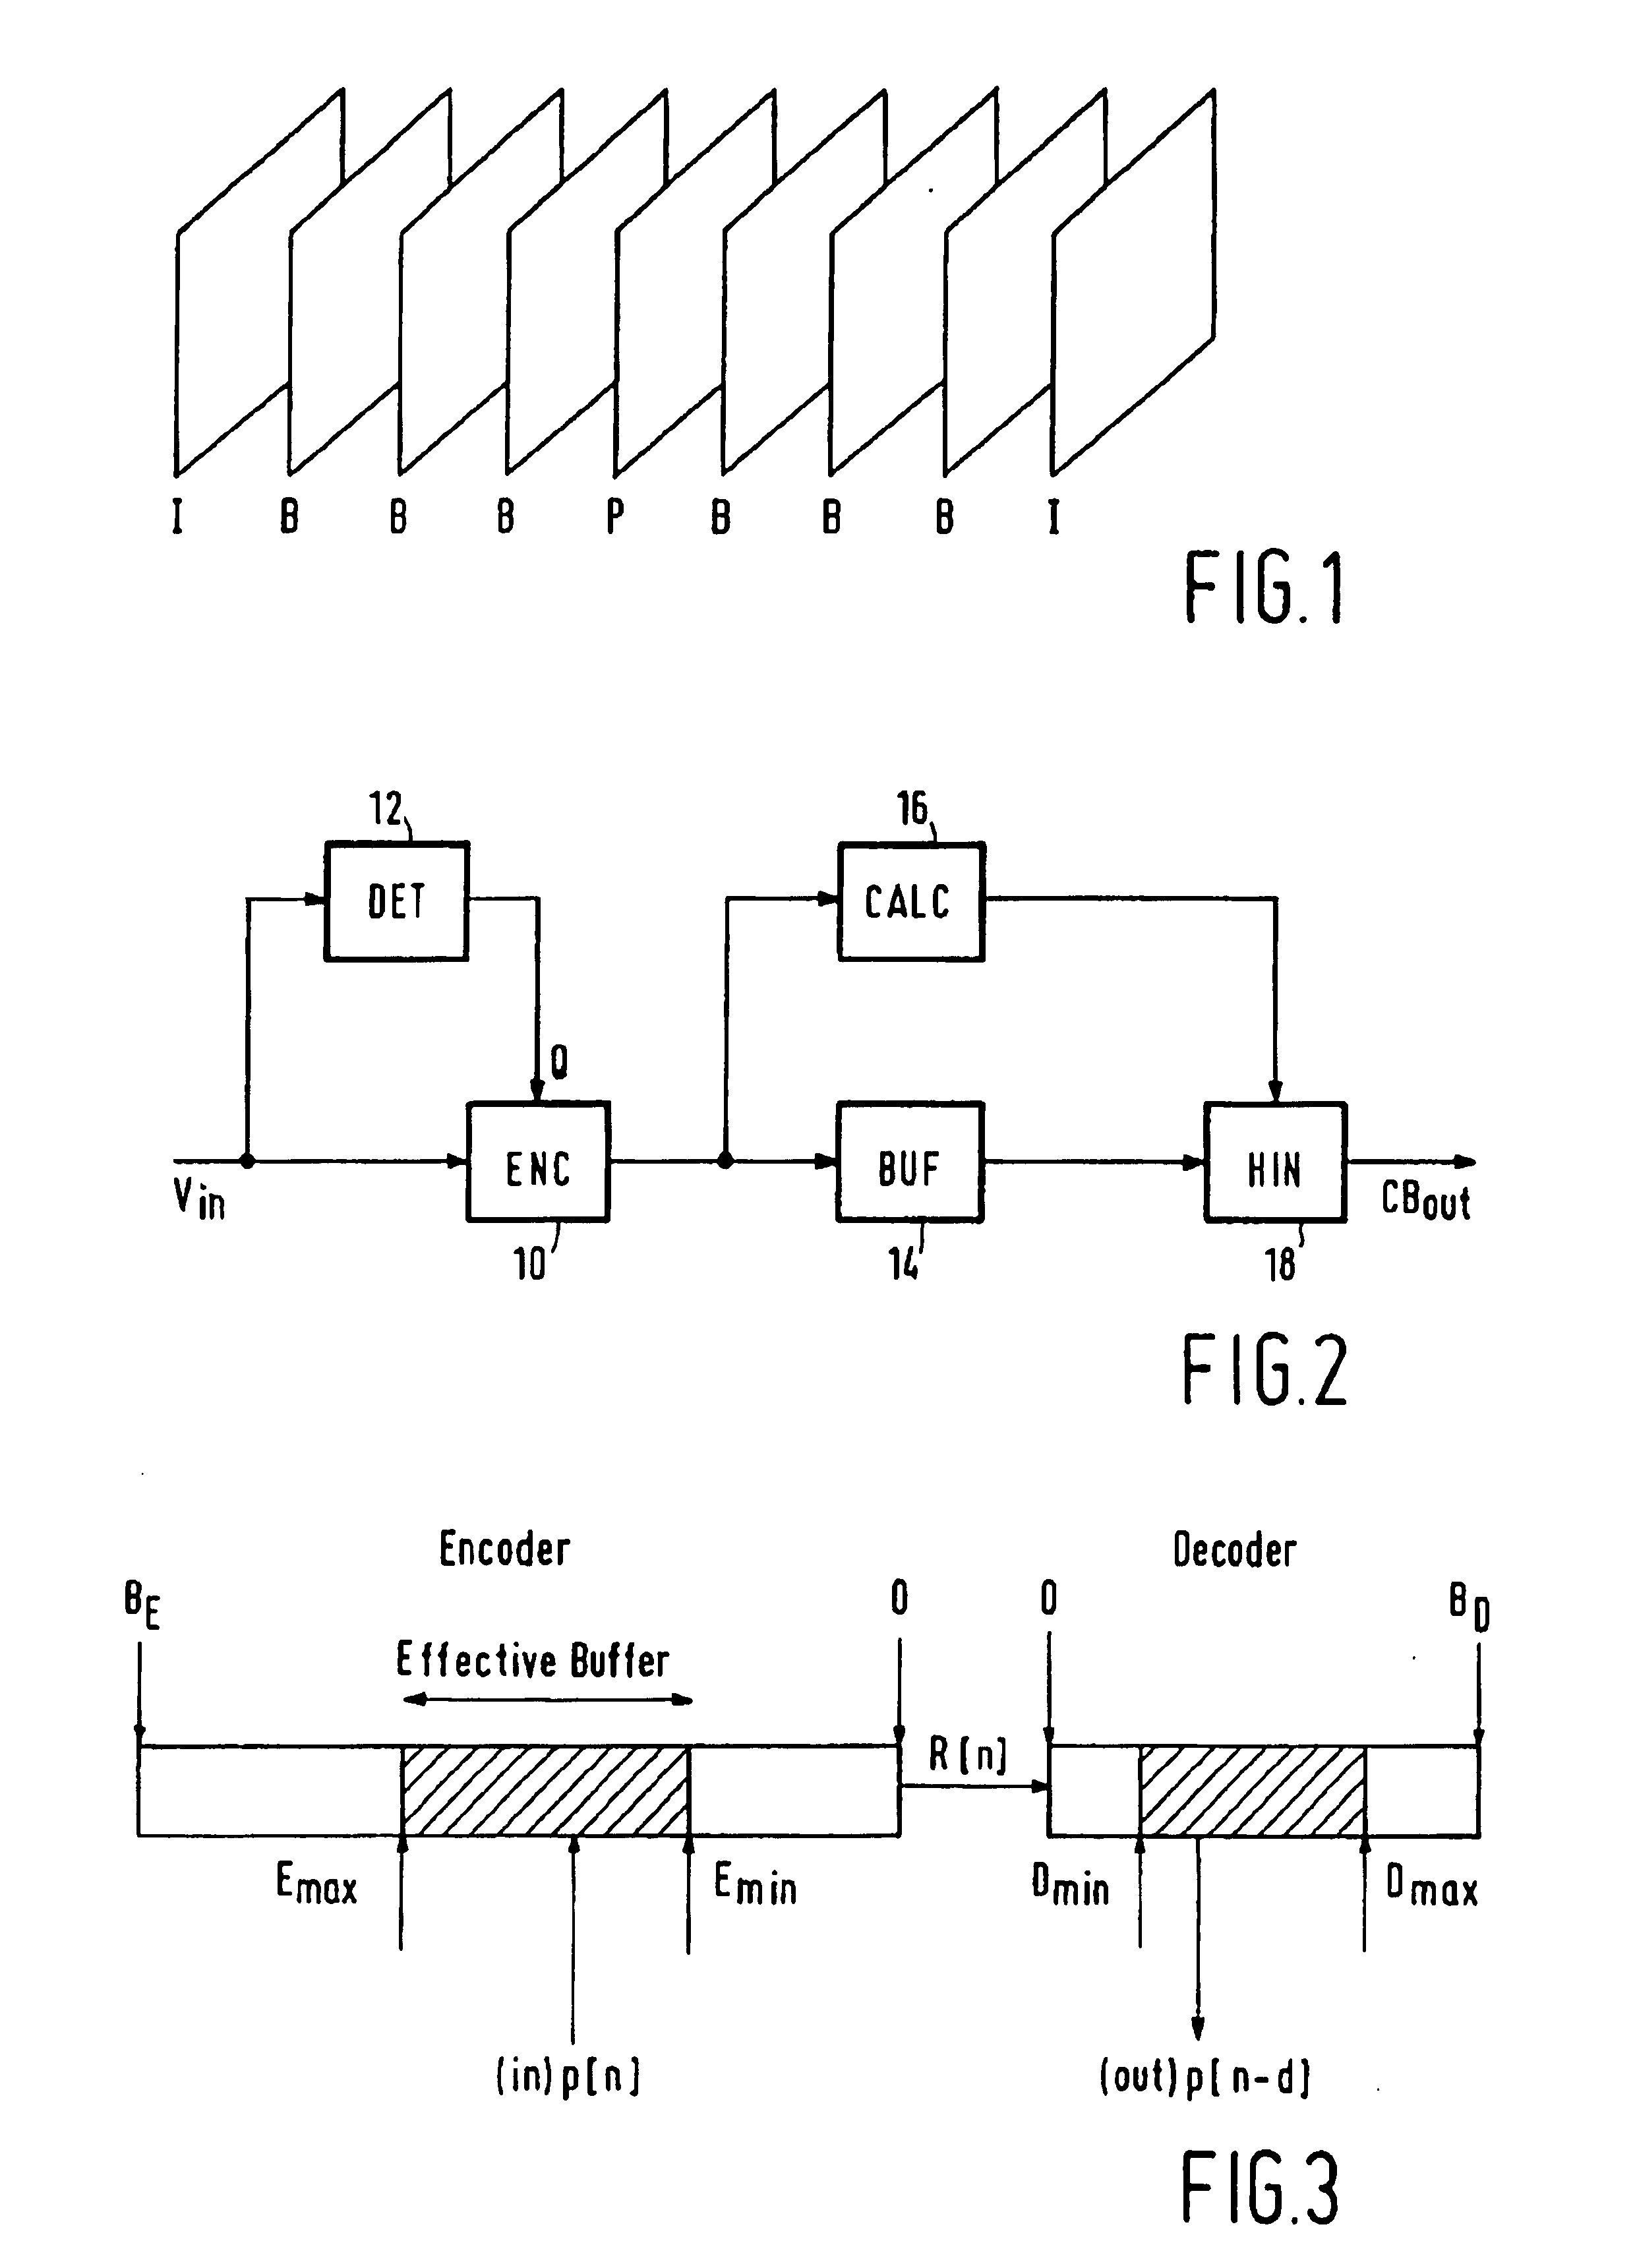 Buffer management in variable bit-rate compression systems